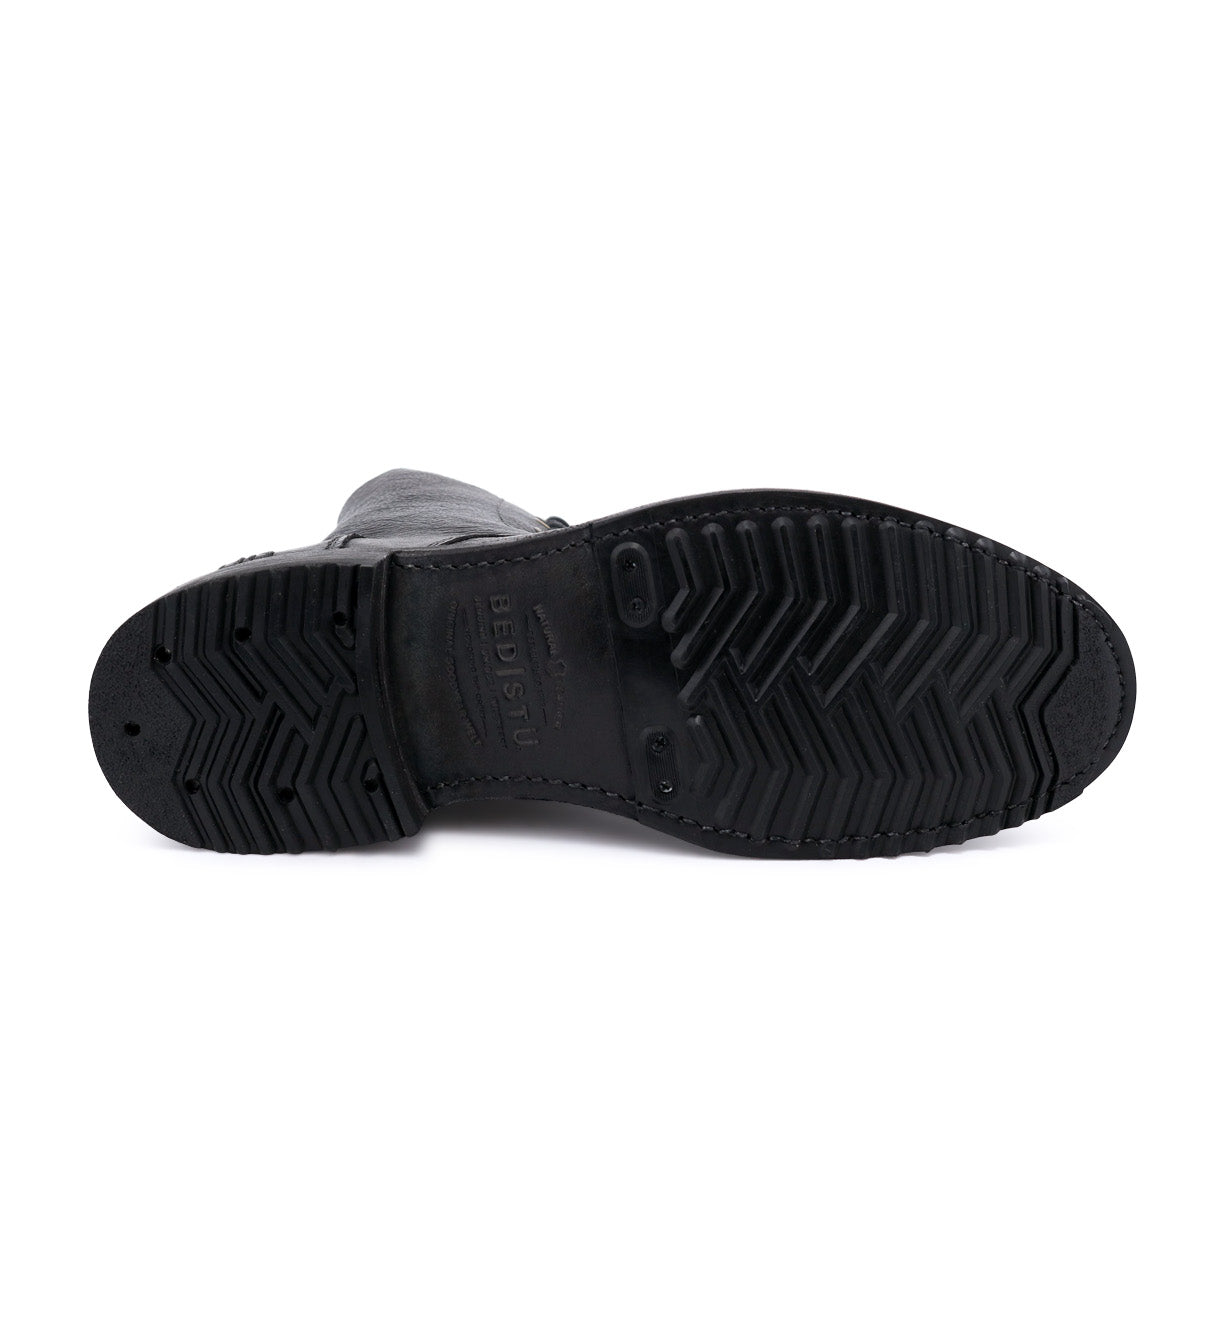 A pair of Bed Stu black shoes with a rubber sole.